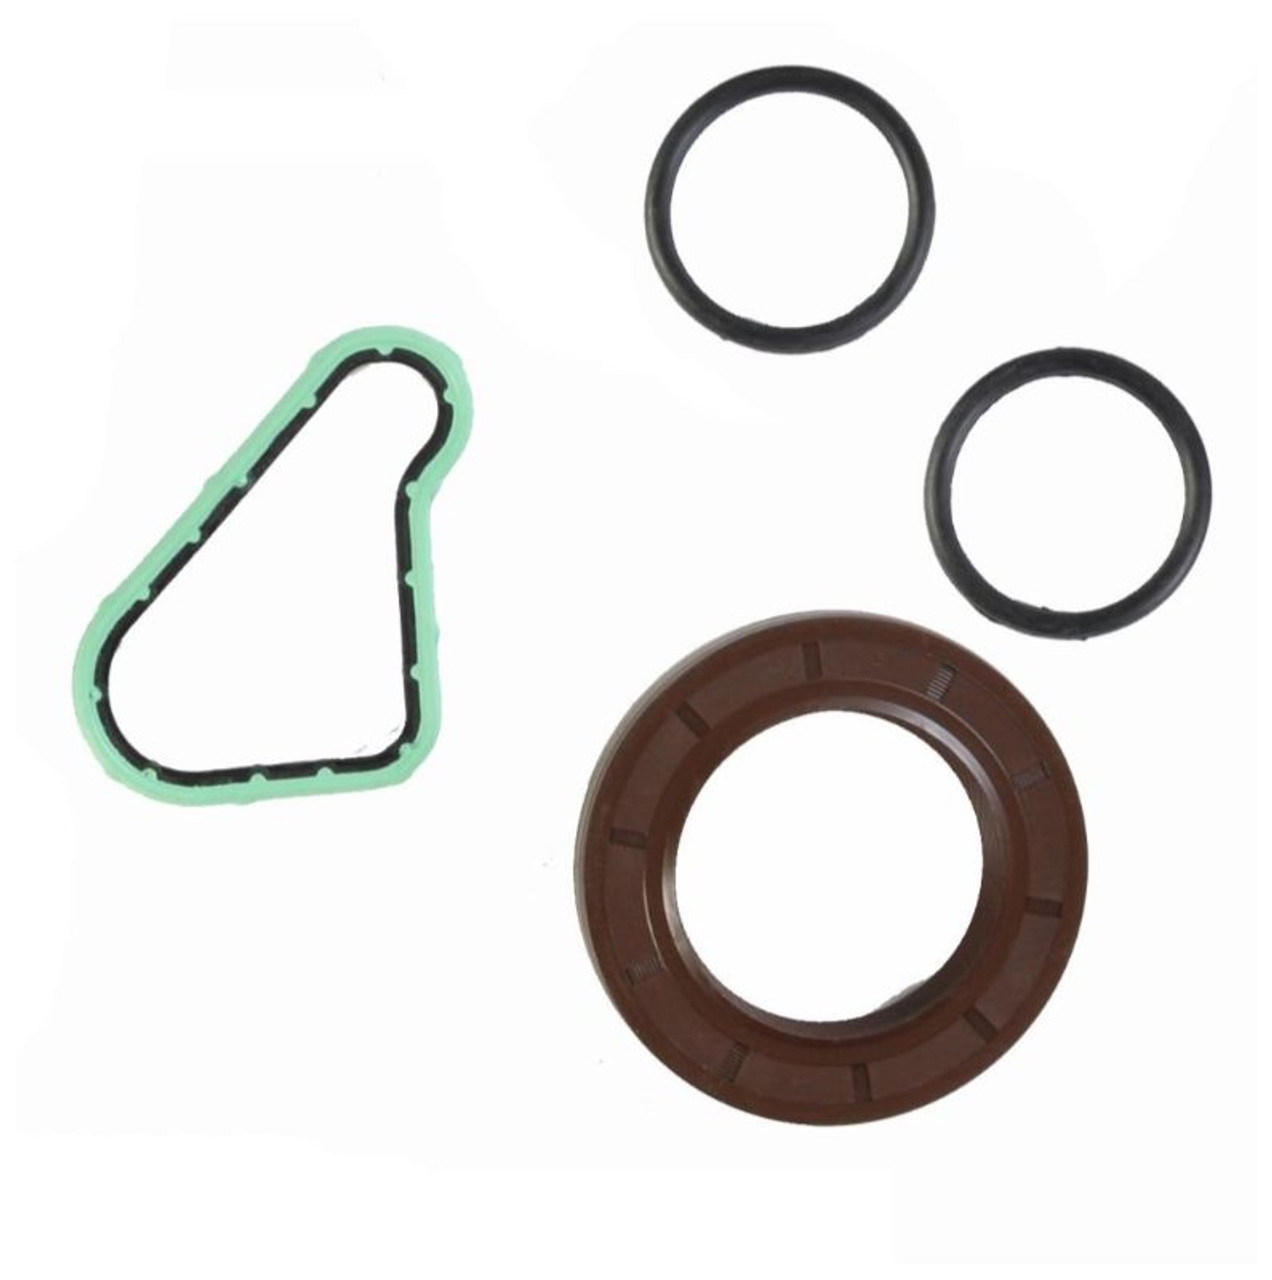 2003 Jeep Grand Cherokee 4.7L Engine Timing Cover Gasket Set TCCR226-A -13